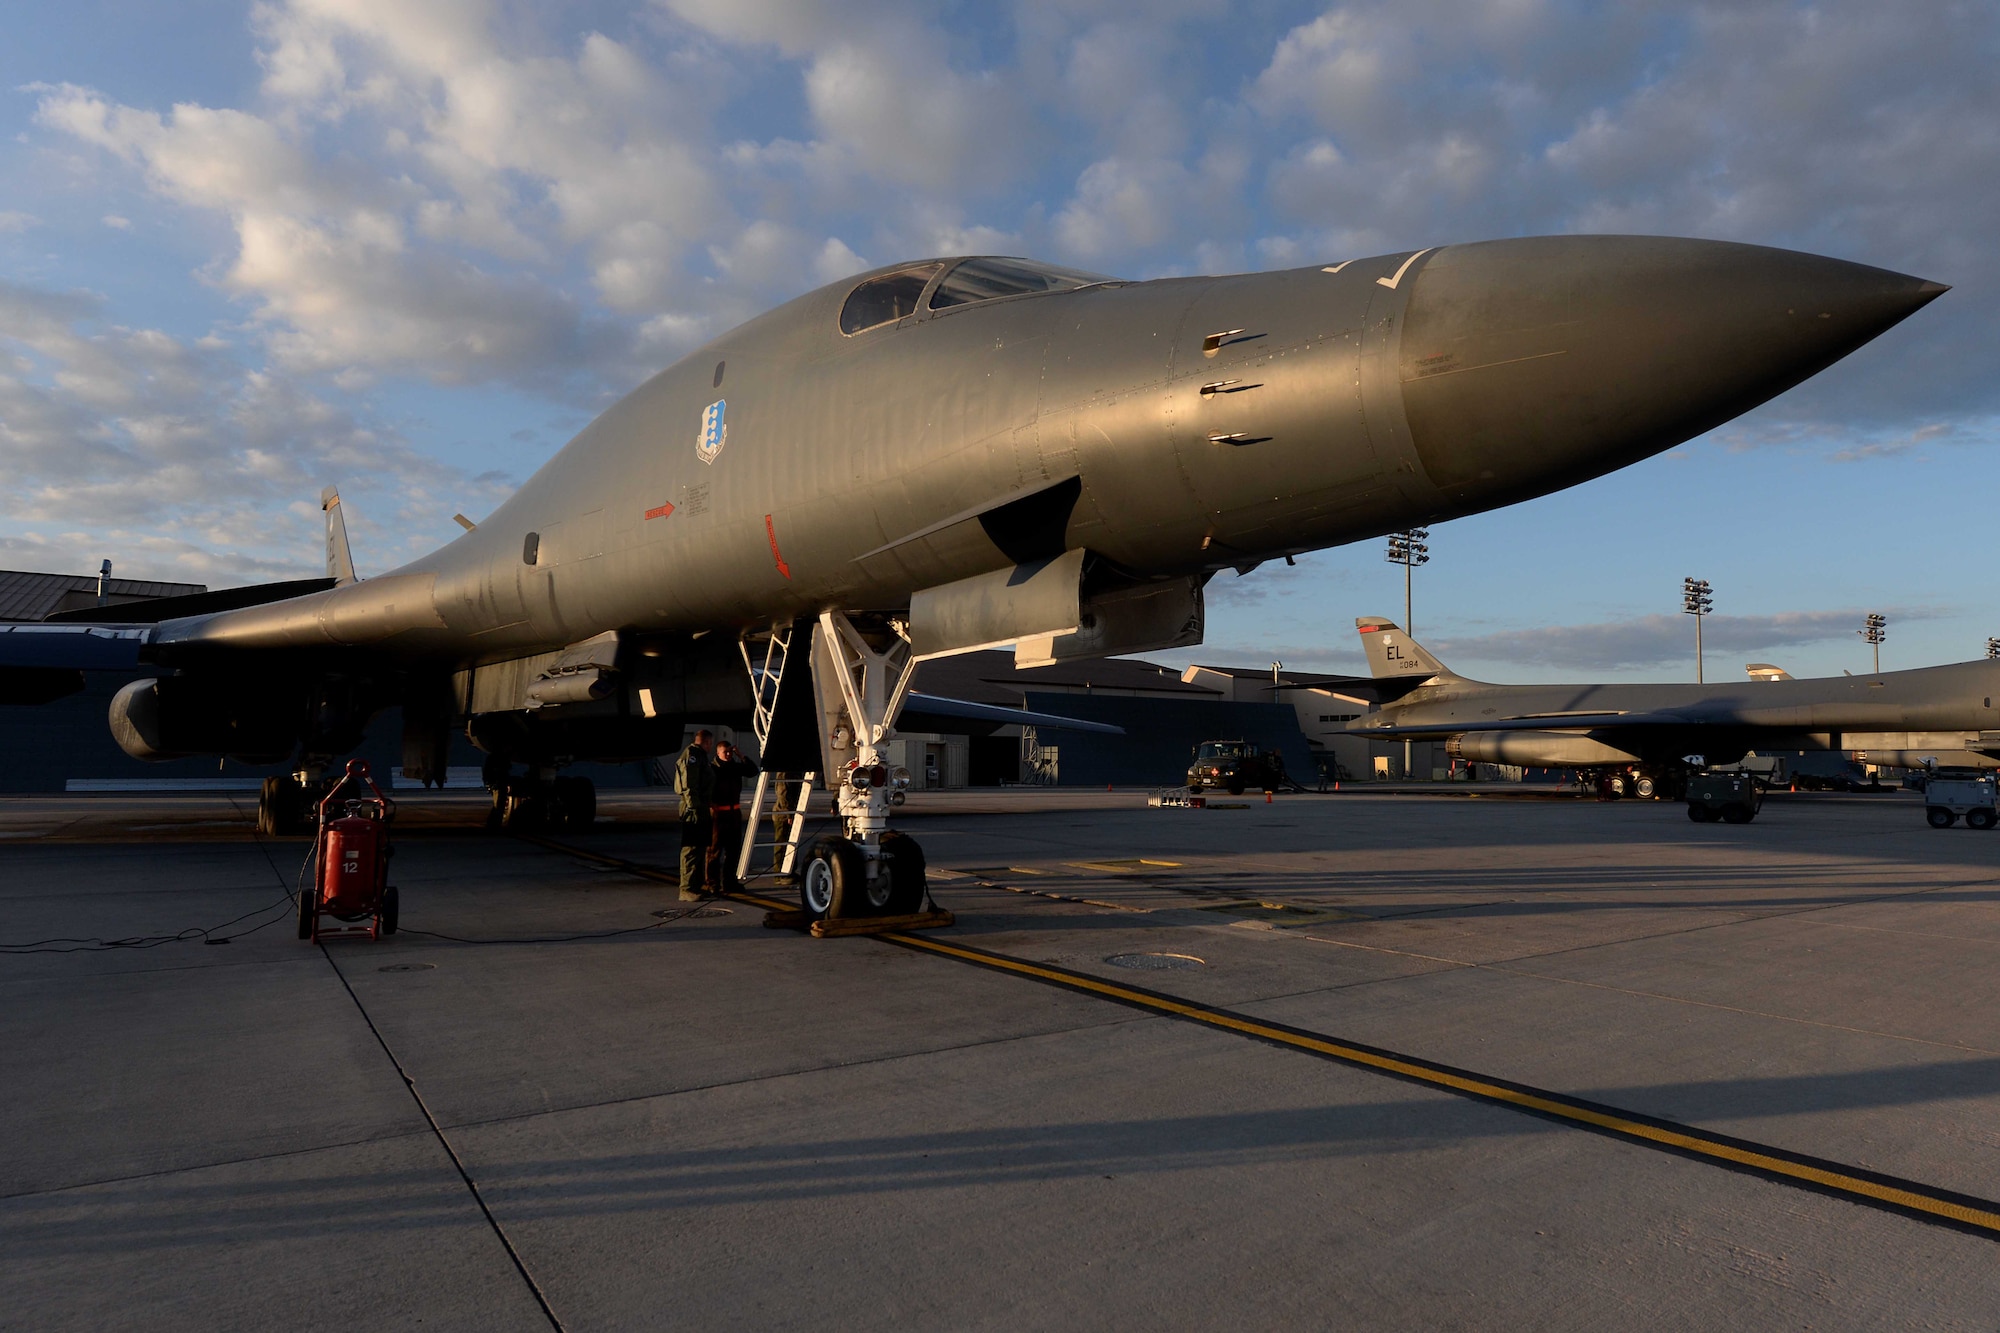 Aviators and maintainers perform final checks on a B-1B Lancer, May 12, 2014, on the flightline at Ellsworth Air Force Base, S.D. The 28th Bomb Wing generated two B-1s in support of a round trip, non-stop training mission from Ellsworth to employ munitions on a range near Guam, demonstrating the long-range, precision strike capabilities of the aircraft. (U.S. Air Force photo by Airman 1st Class Rebecca Imwalle)